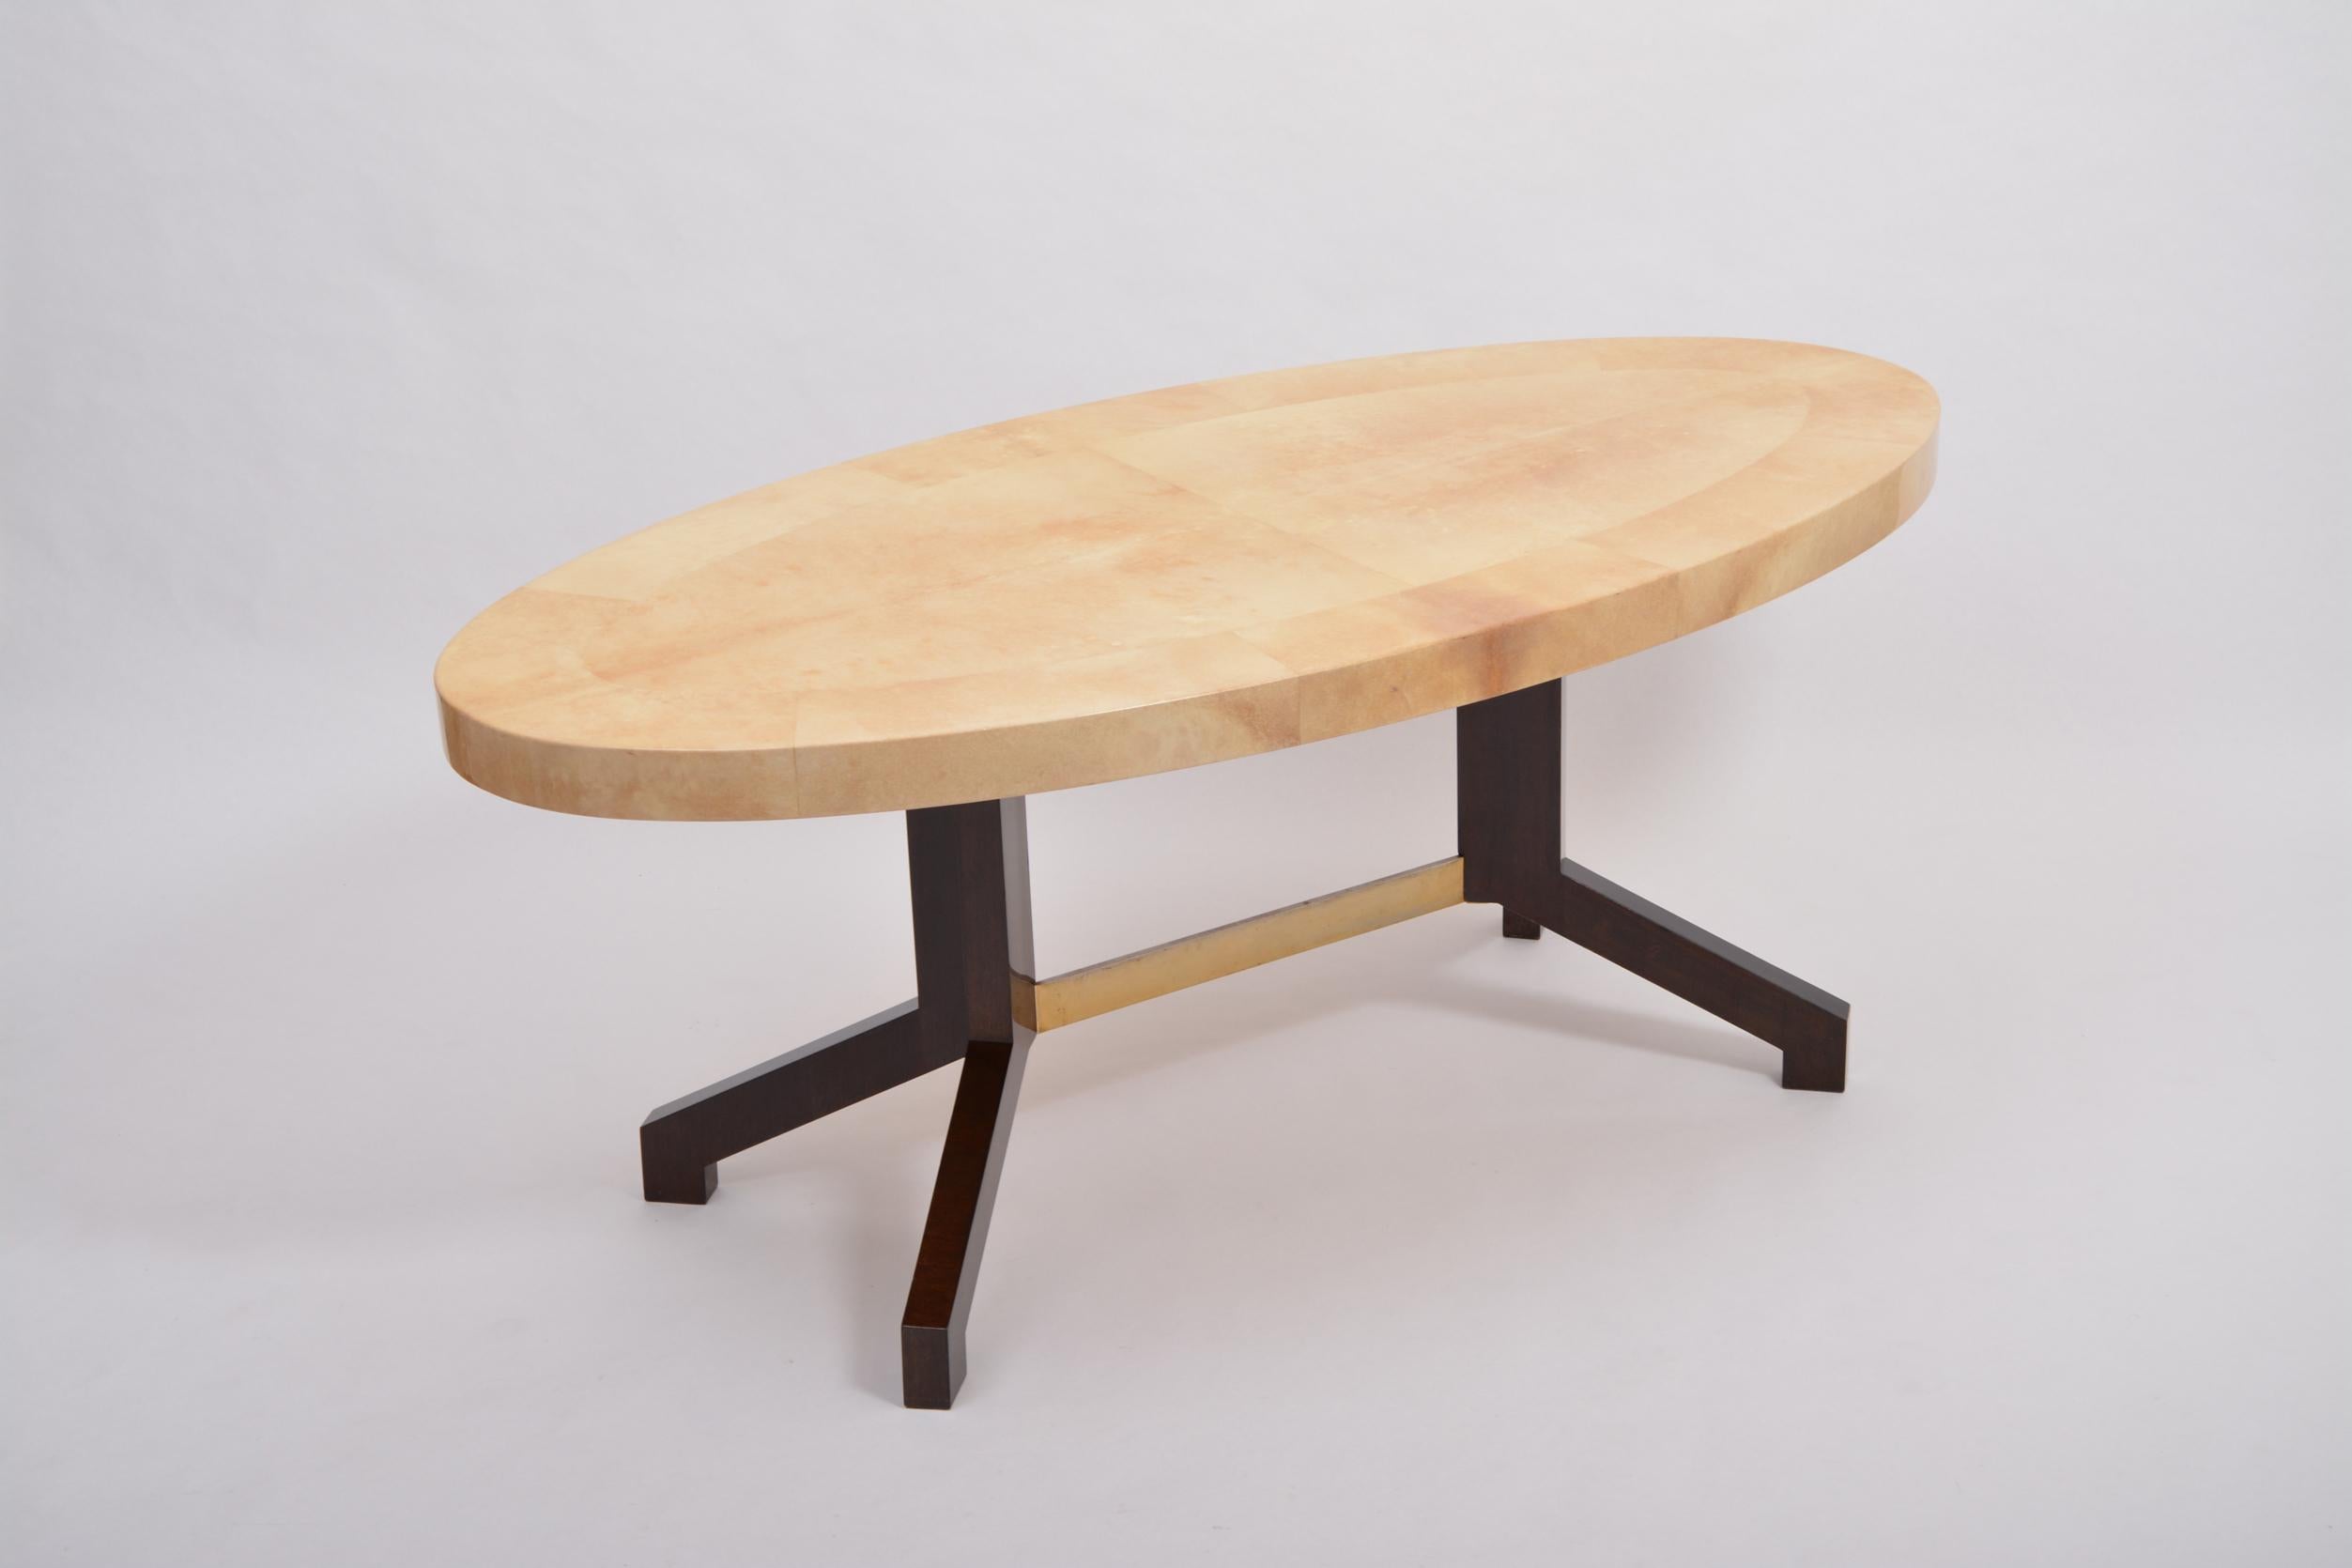 20th Century Beige Aldo Tura Oval Dining Table in Lacquered Goatskin